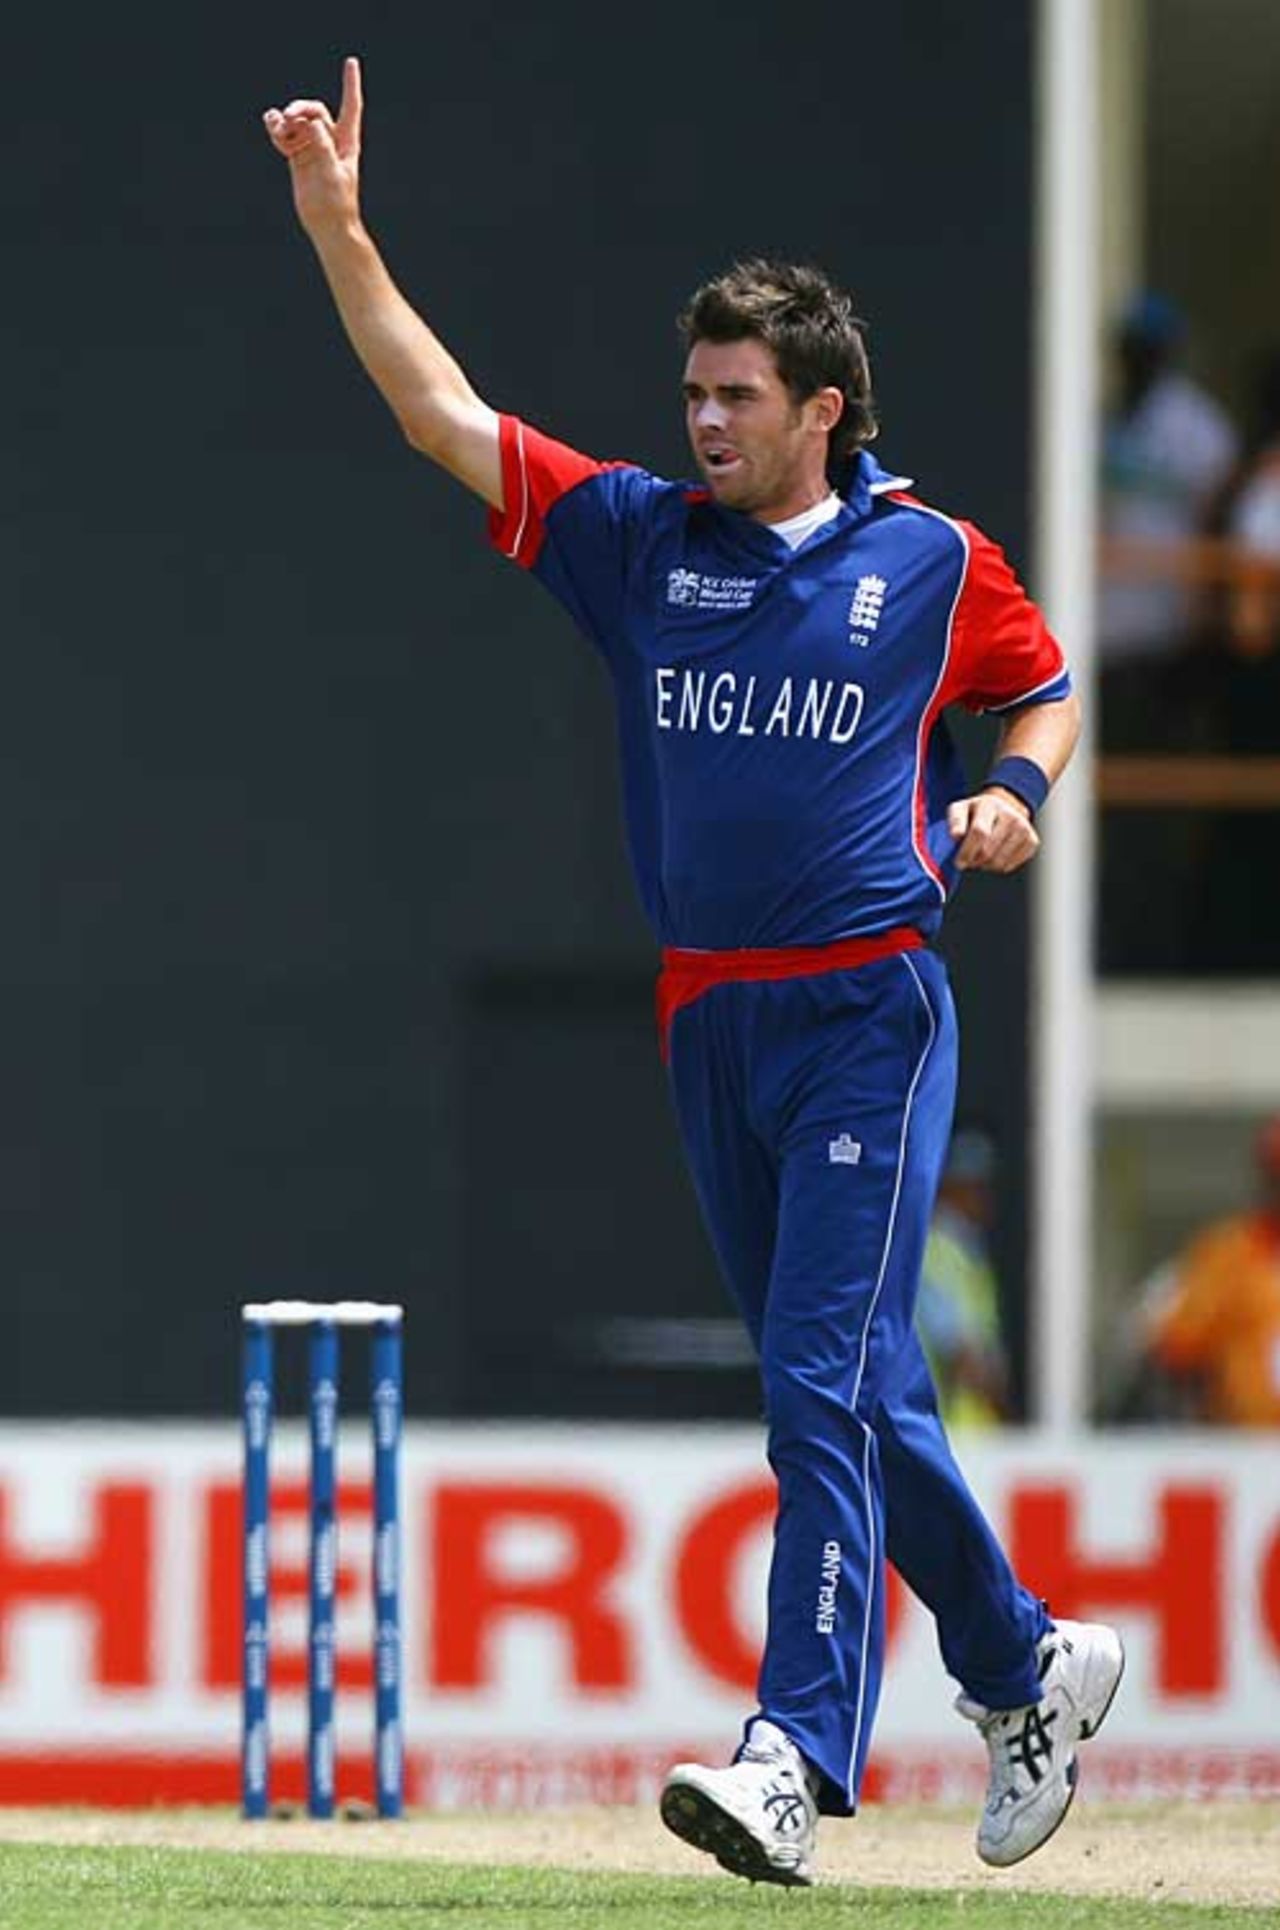 James Anderson struck in his first over, England v Ireland, Super Eights, Guyana, March 30, 2007